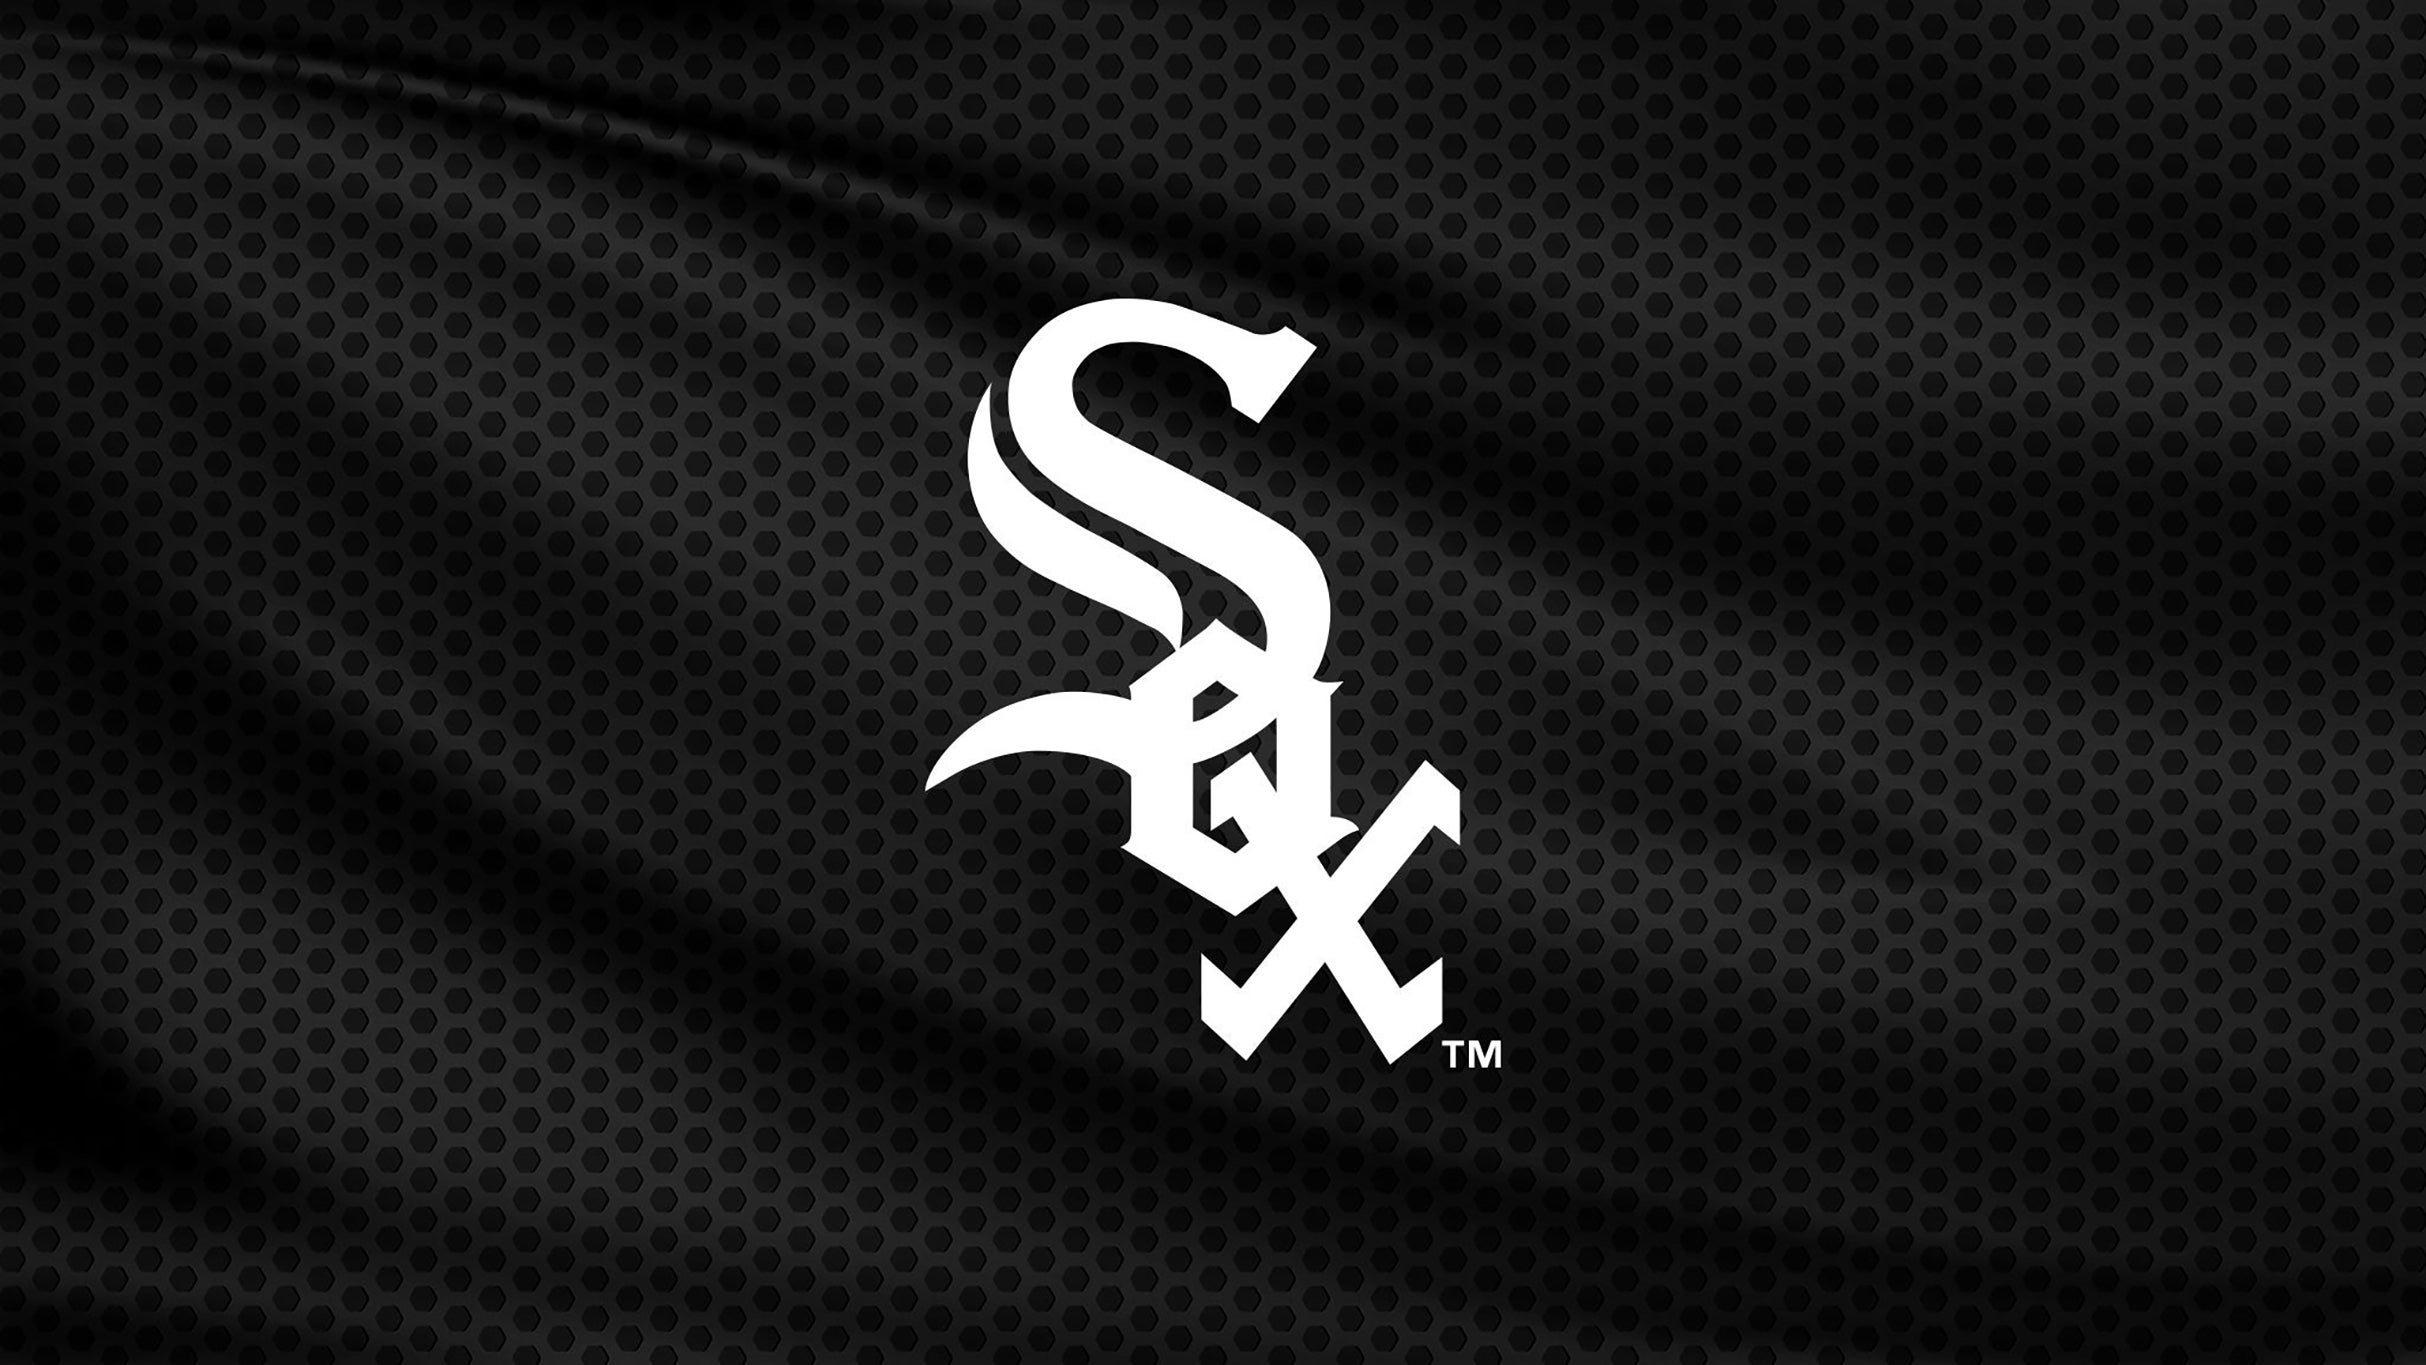 Chicago White Sox vs. Seattle Mariners presales in Chicago